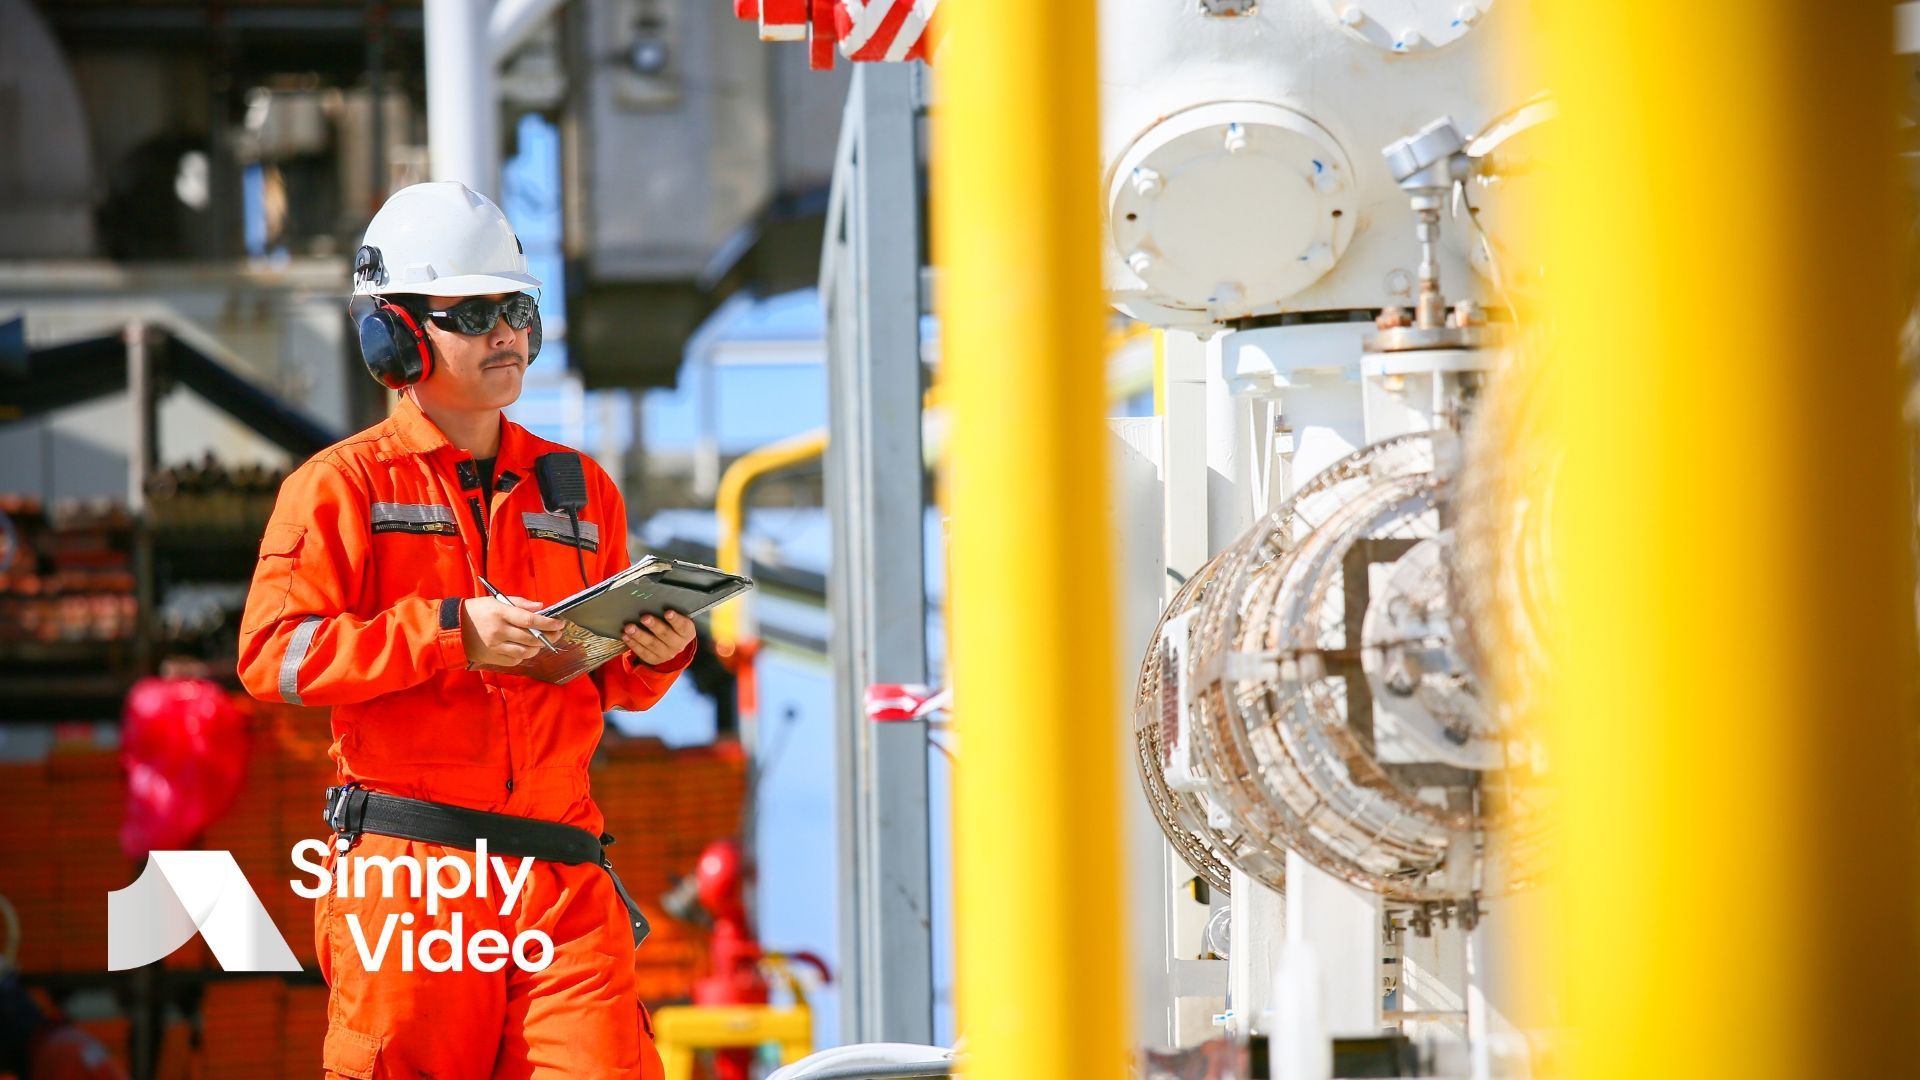 XR collaboration in oil and gas is helping the industry meet unprecedented demand and reskill the next generation of engineers. Find out how in our guide.